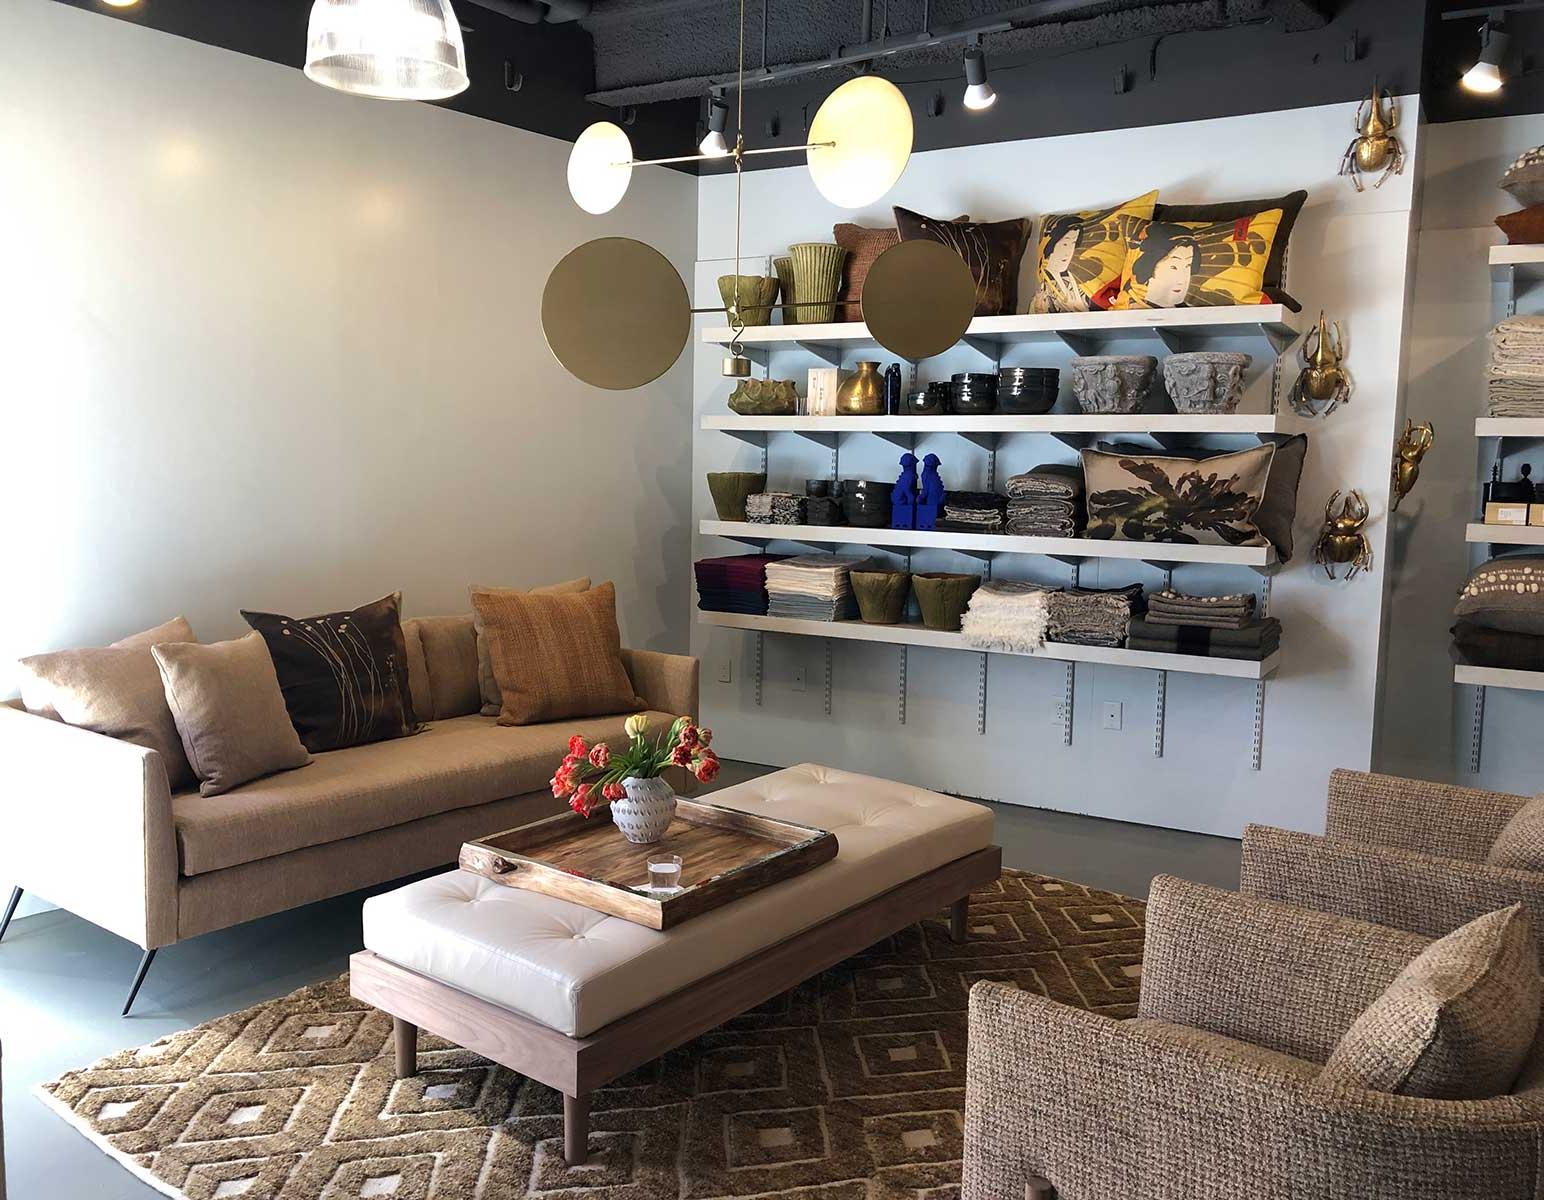 ARTEFACT's new store in Boston's South End